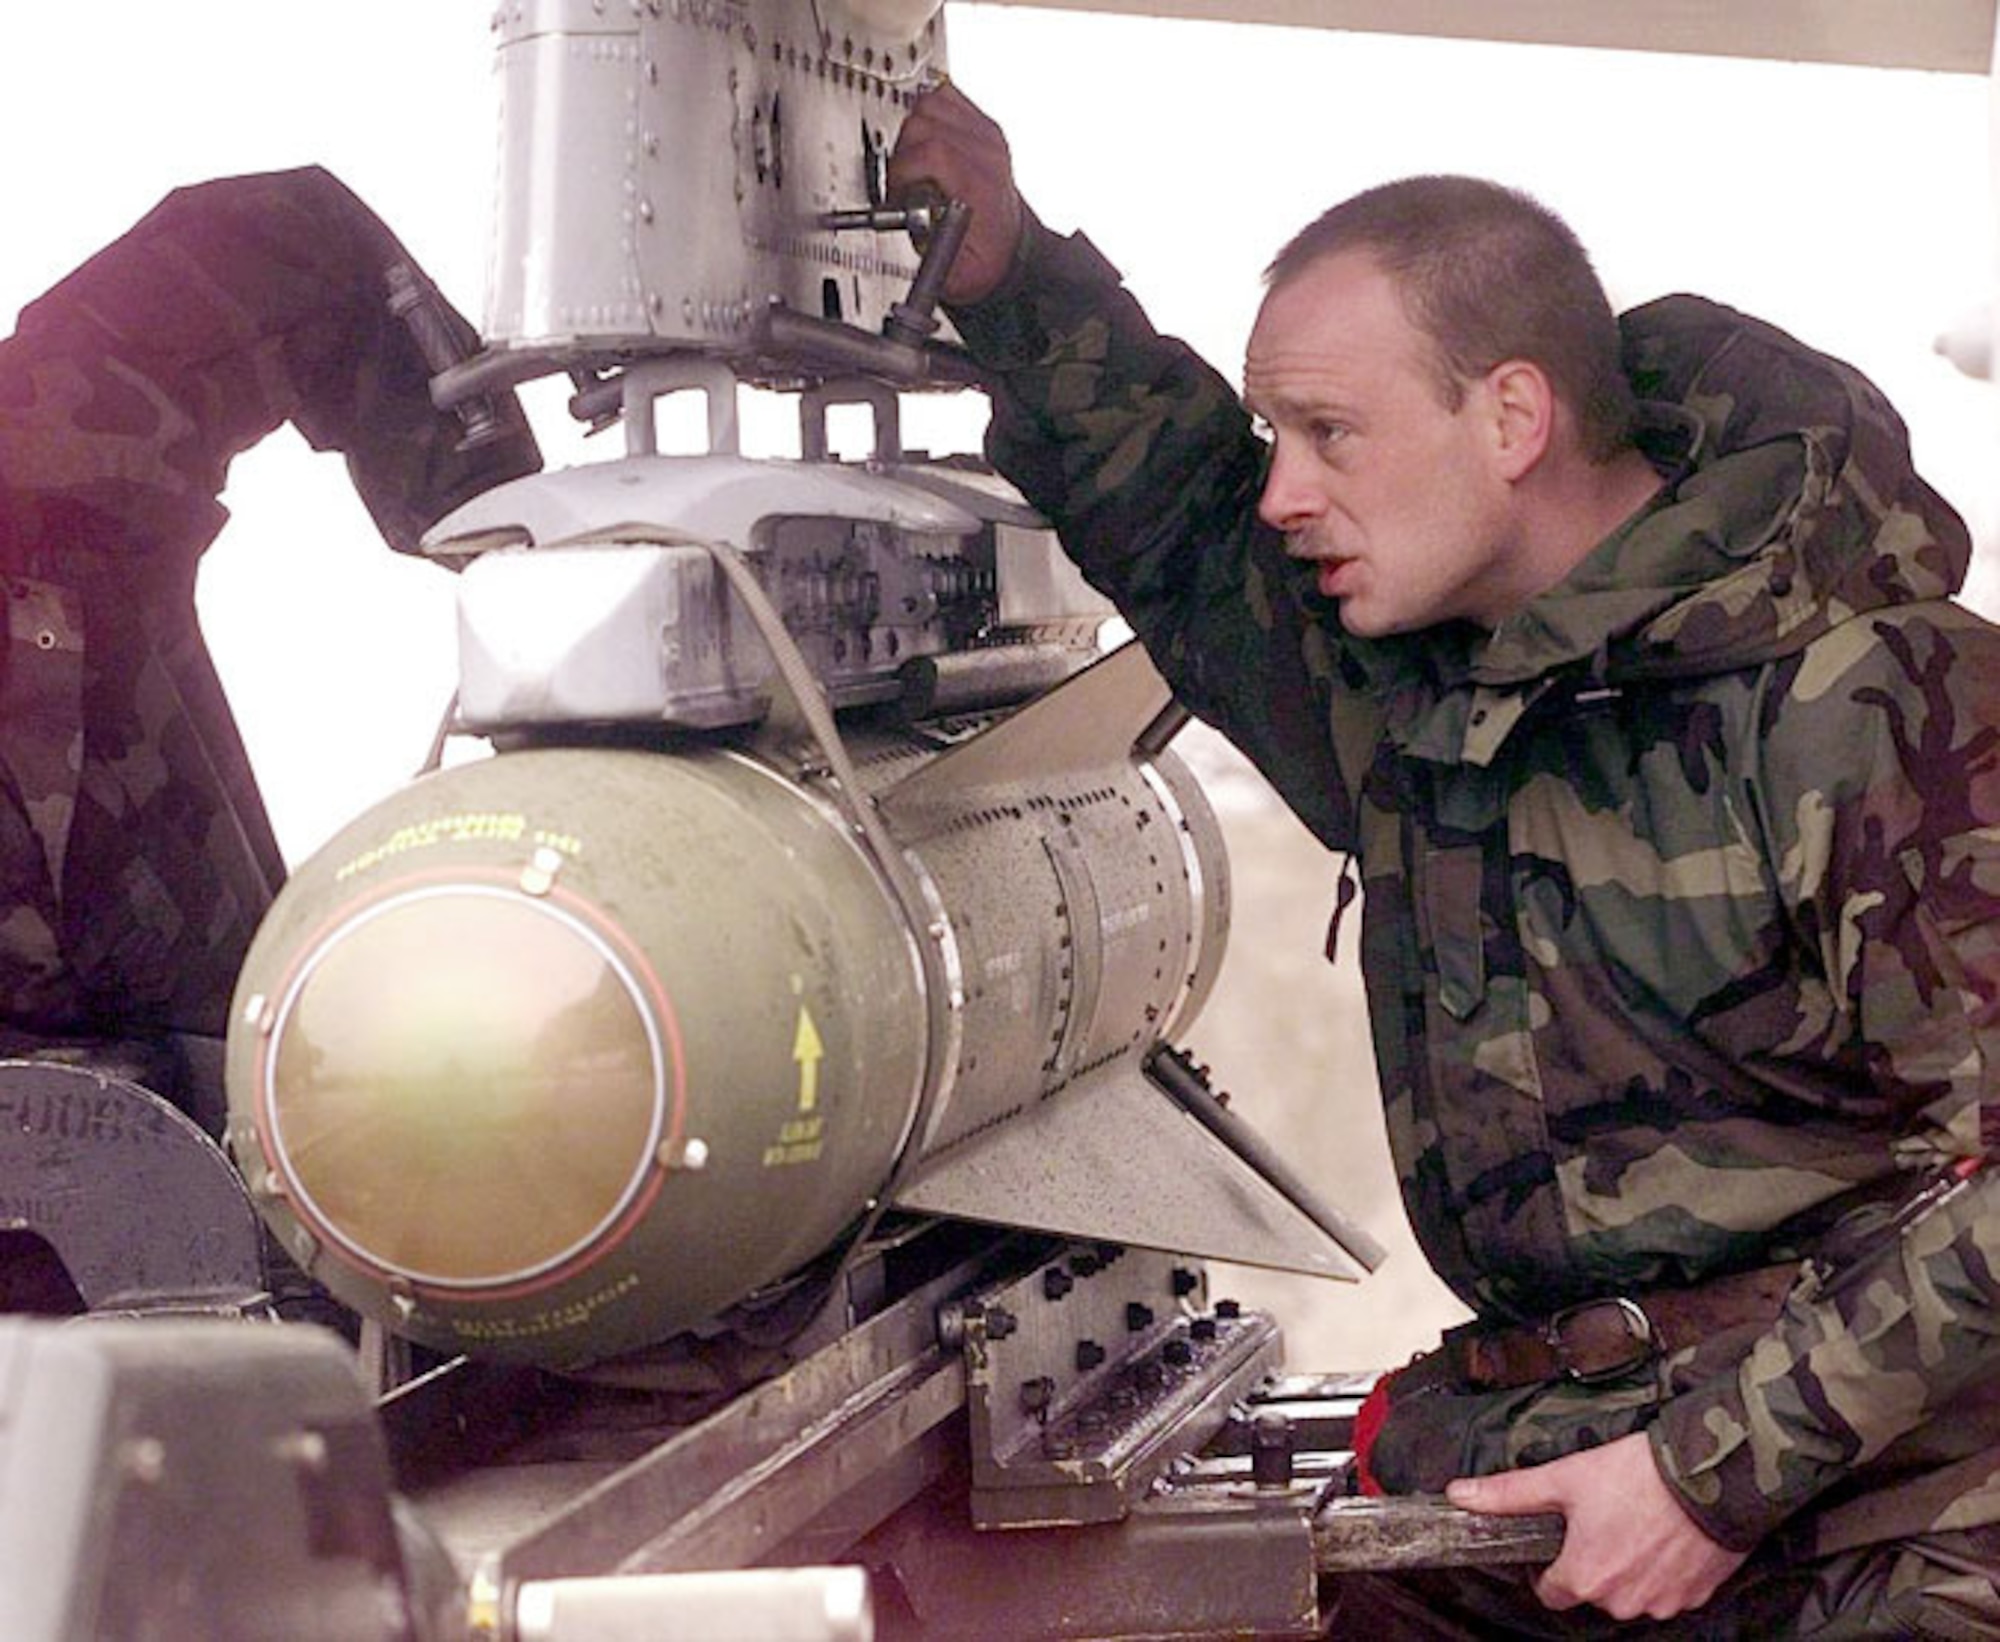 1990's -- GIOIA DEL COLLE, Italy -- Staff Sgt. Todd Kenny helps position an AGM-65 Maverick missile underneath the wing of an A-10 Thunderbolt II.  Kenny, of Lake Luzerene, New York, is part of the 81st Expeditionary Fighter Squadron. The 81st EFS is based at Spangdahlem Air Base, Germany, and is supporting NATO Operation Allied Force.